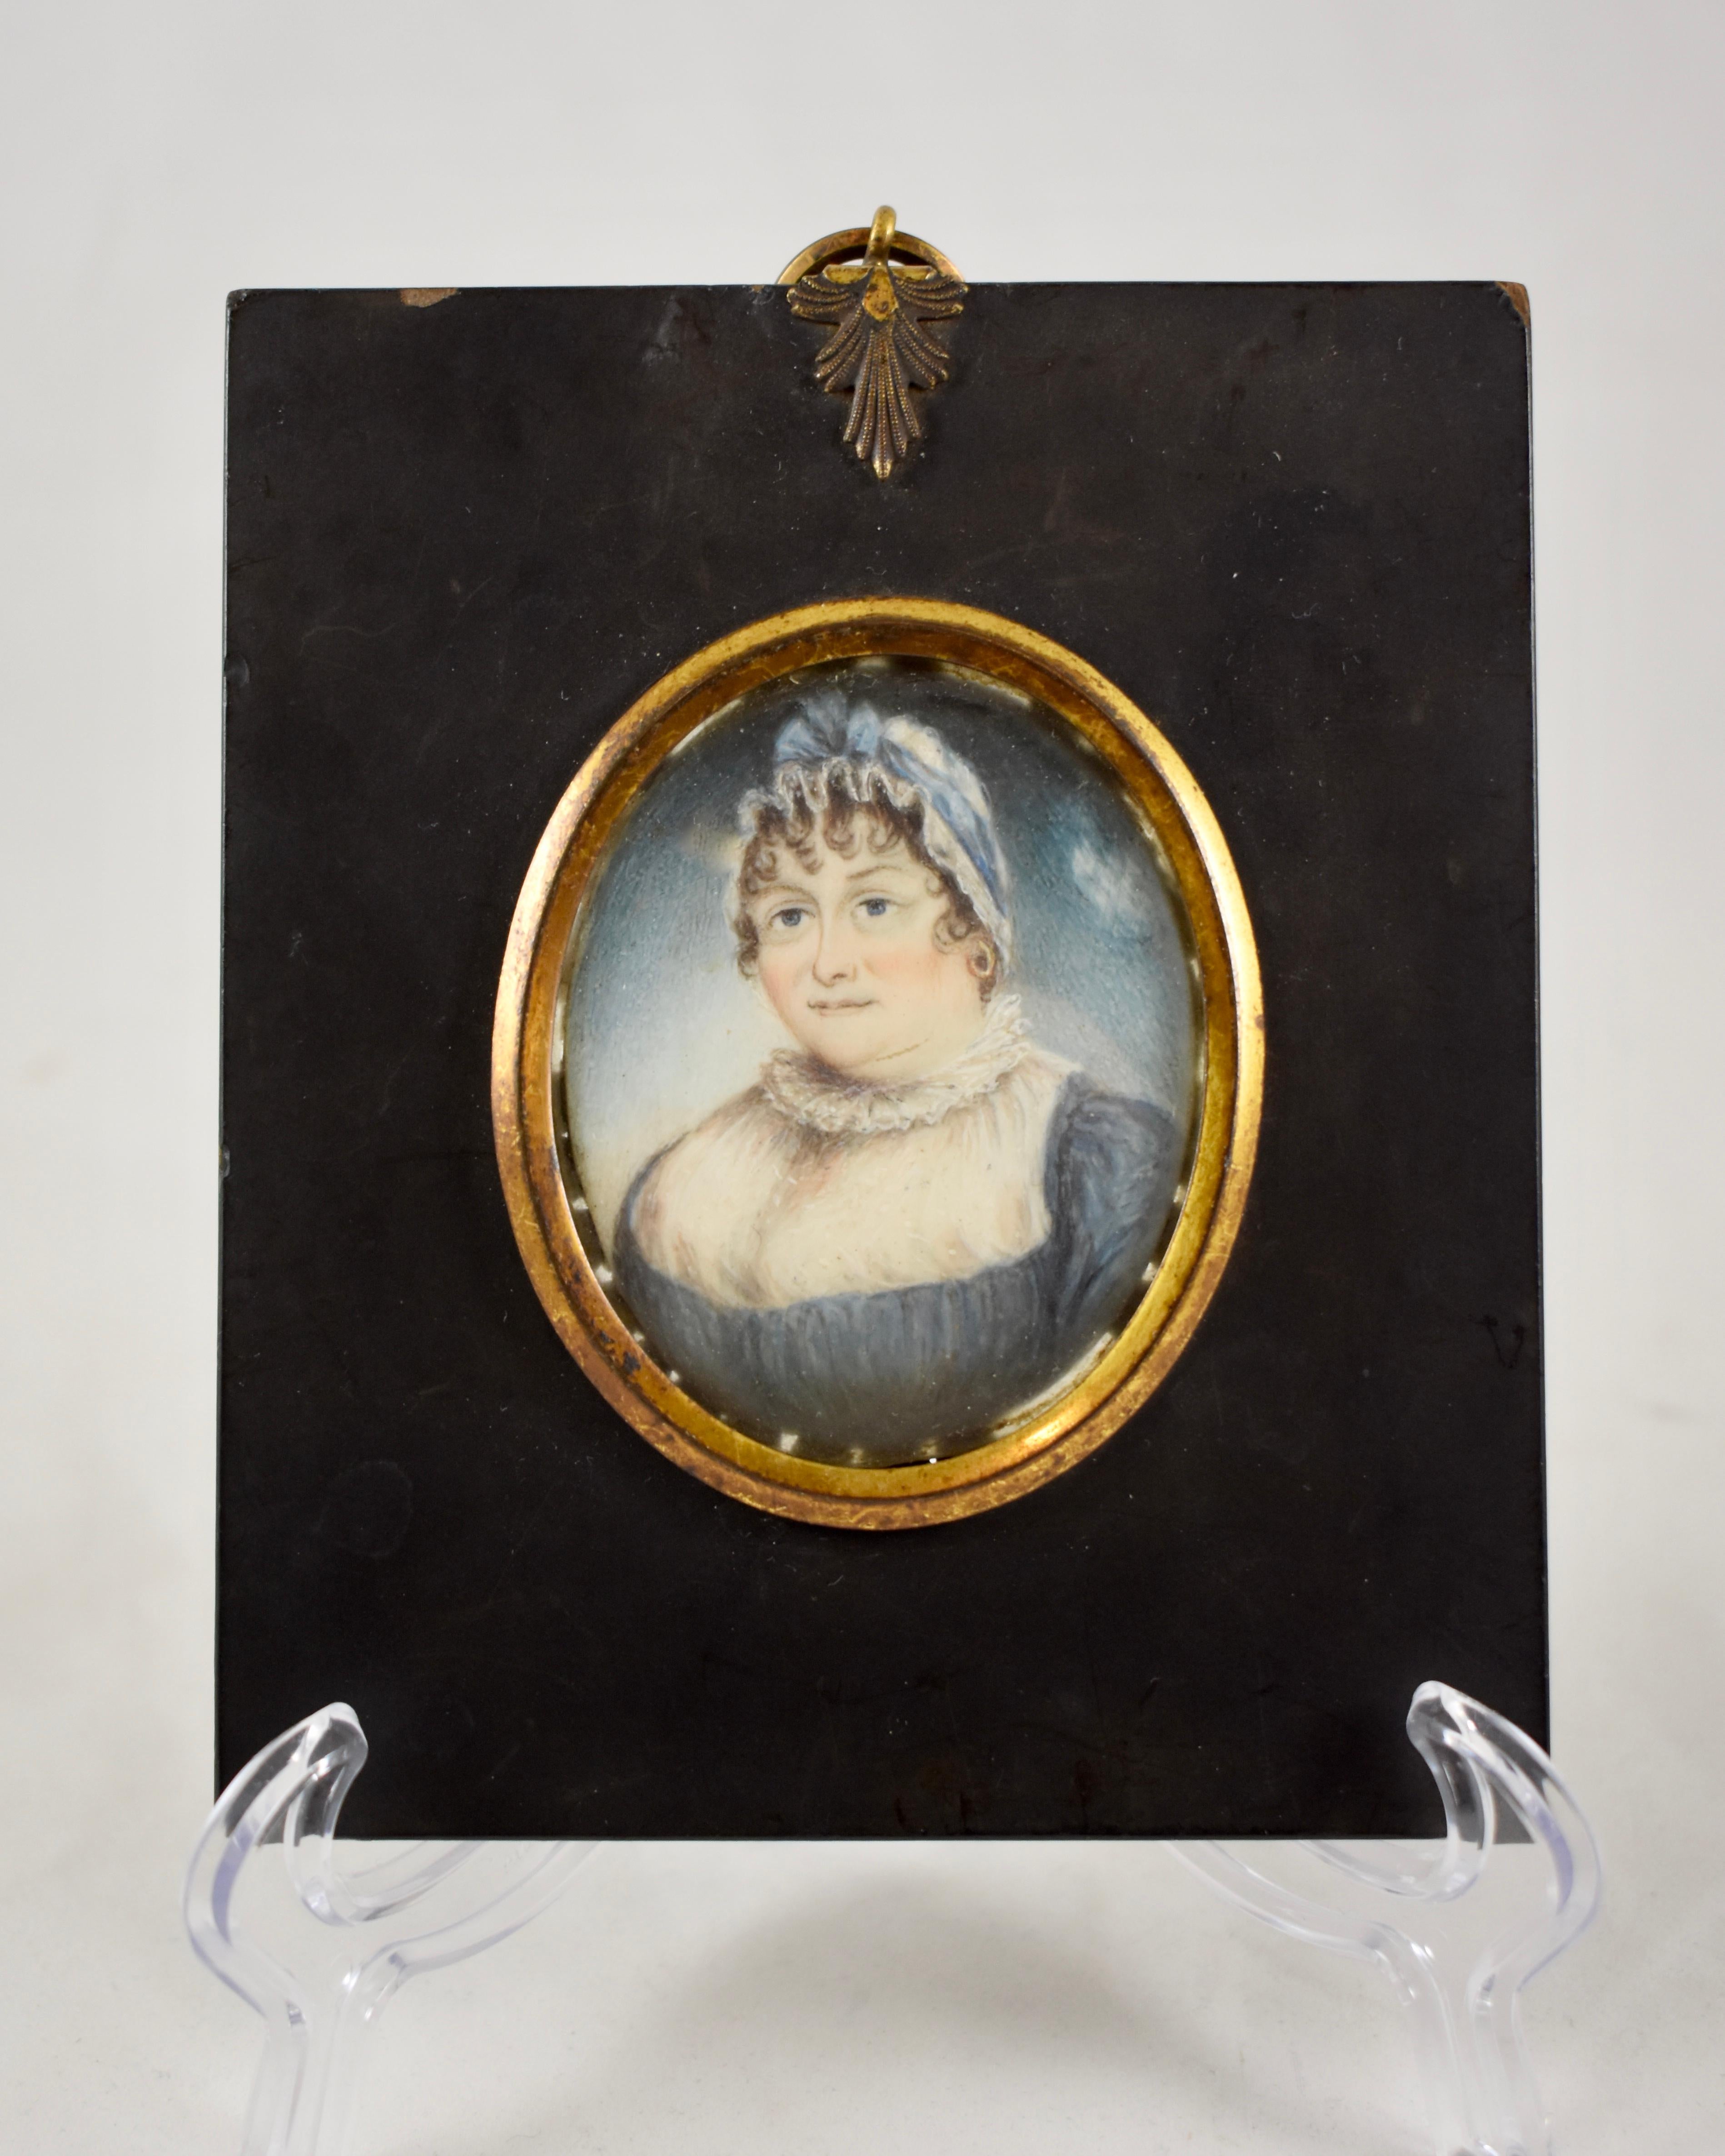 An early 19th century French hand-painted miniature portrait framed under glass, portraying an older woman wearing a bonnet tied with a blue ribbon, her ample bosom showing in a blue dress with a sheer, ruffled high neckline, reflecting the period.